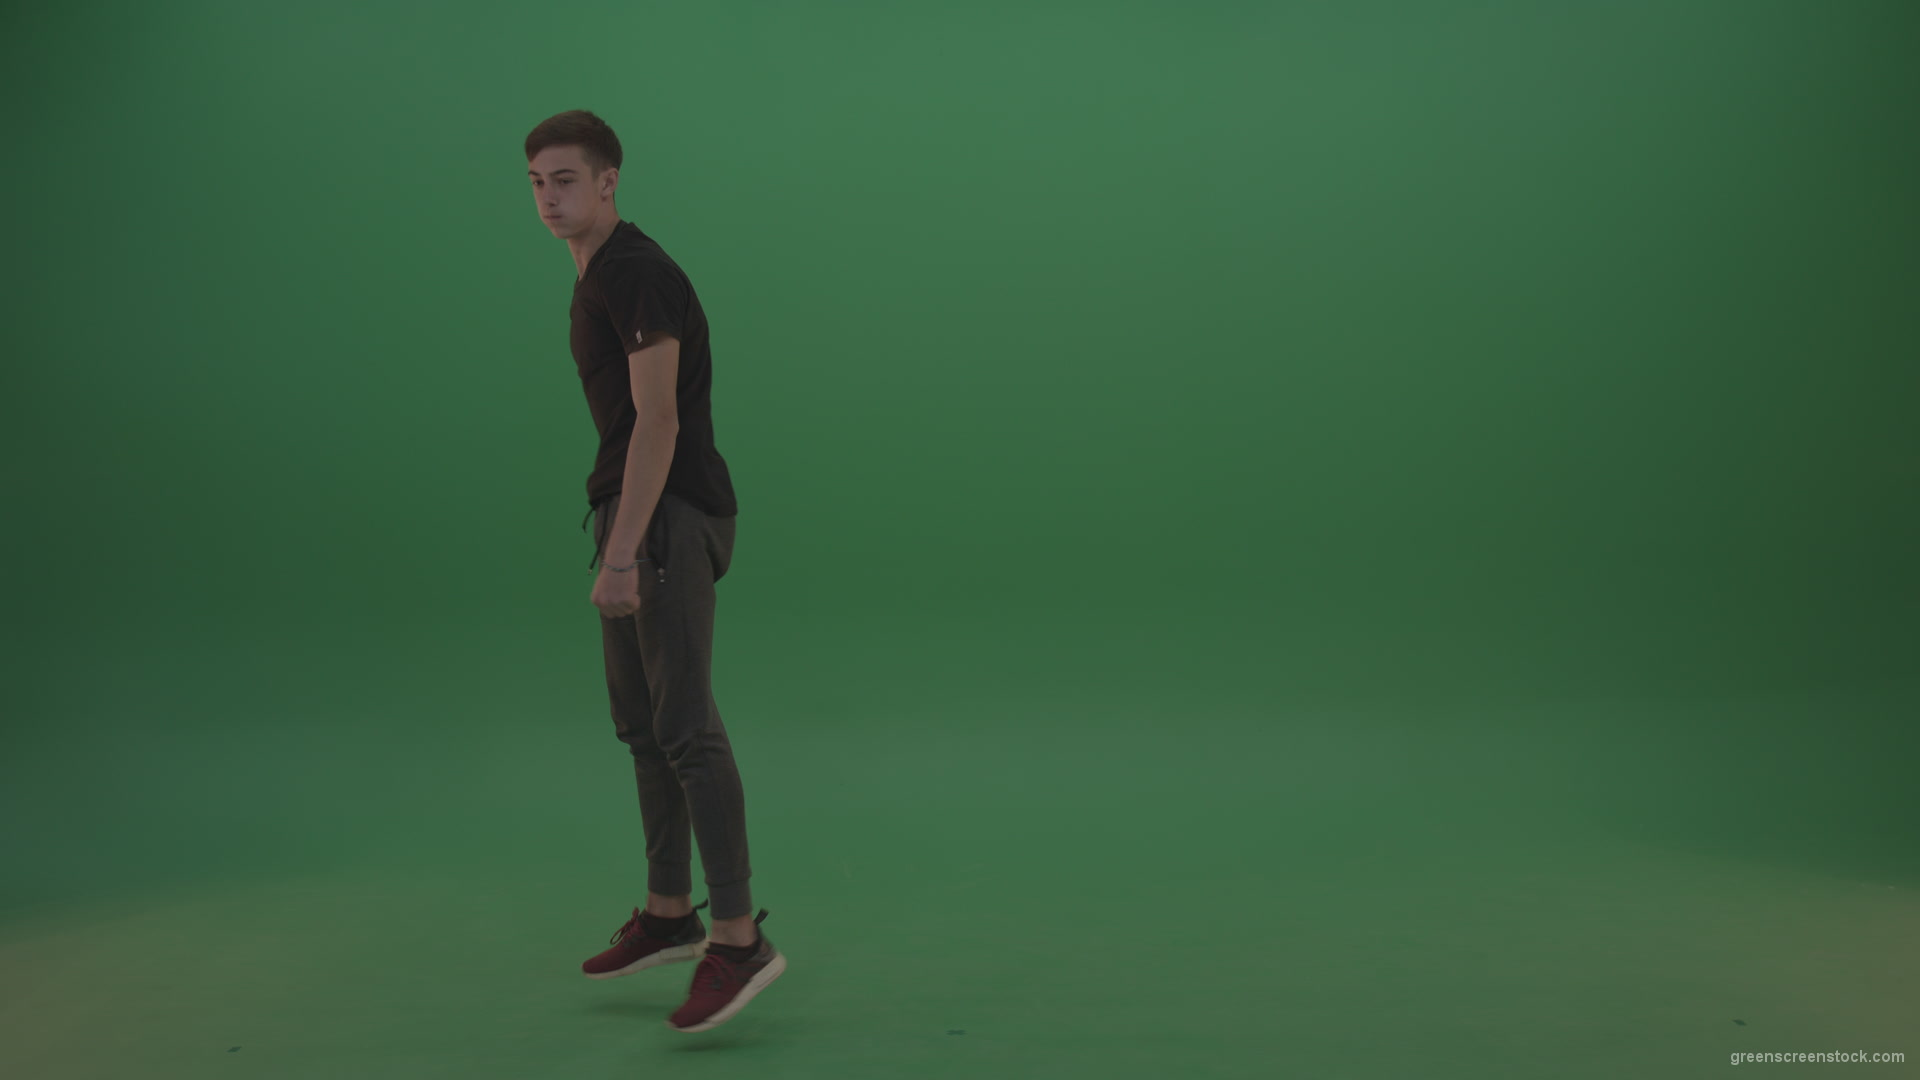 Young_Dark_Hair_Boy_Does_Perfect_Scoot_Back_360_Freerun_Parkour_Trick_On_Green_Screen_Wall_Background_009 Green Screen Stock